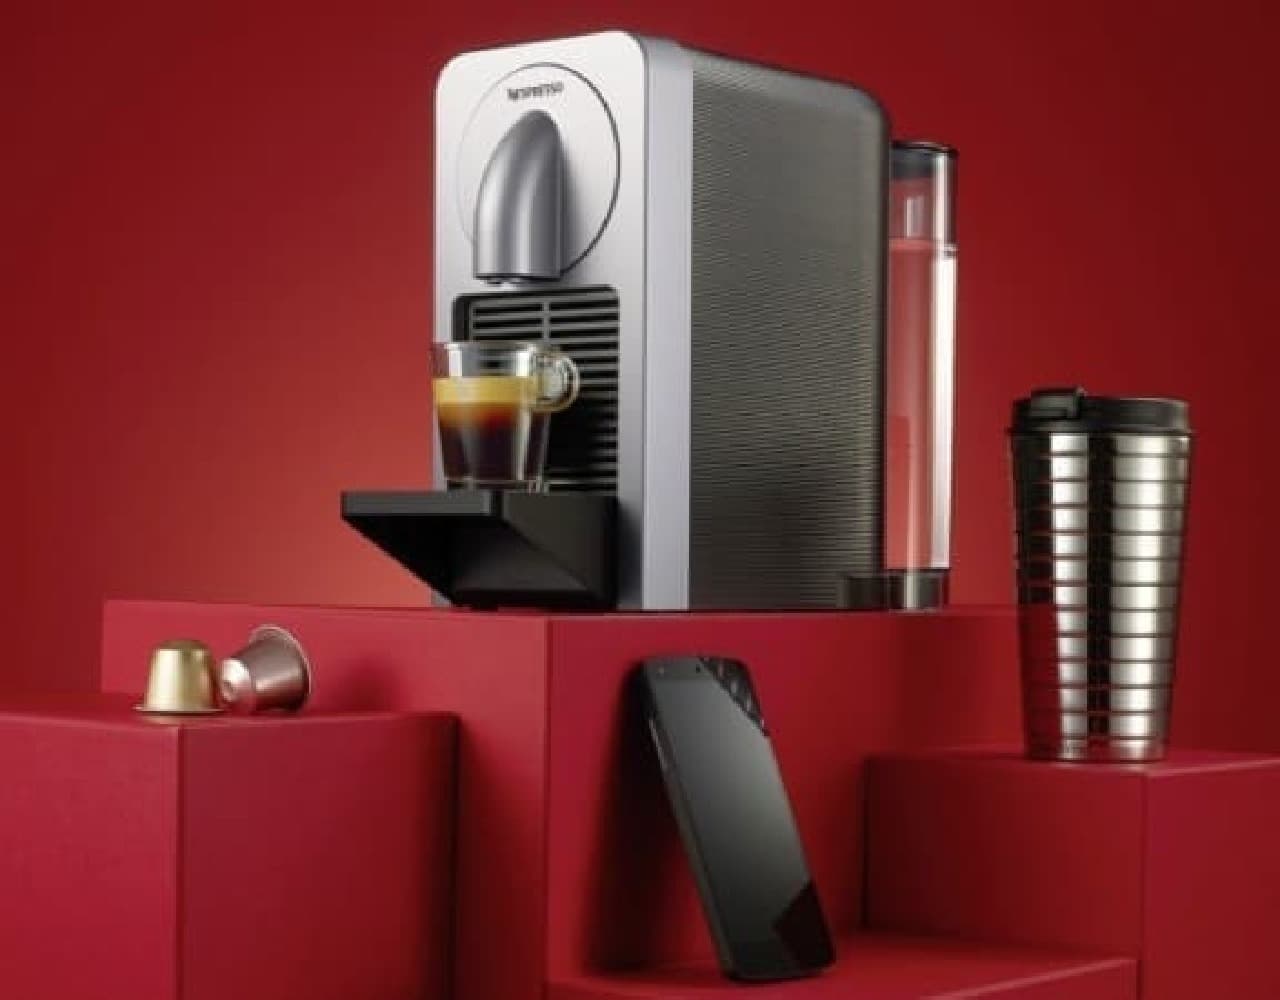 For the first time in Nespresso, it is equipped with a Bluetooth function!